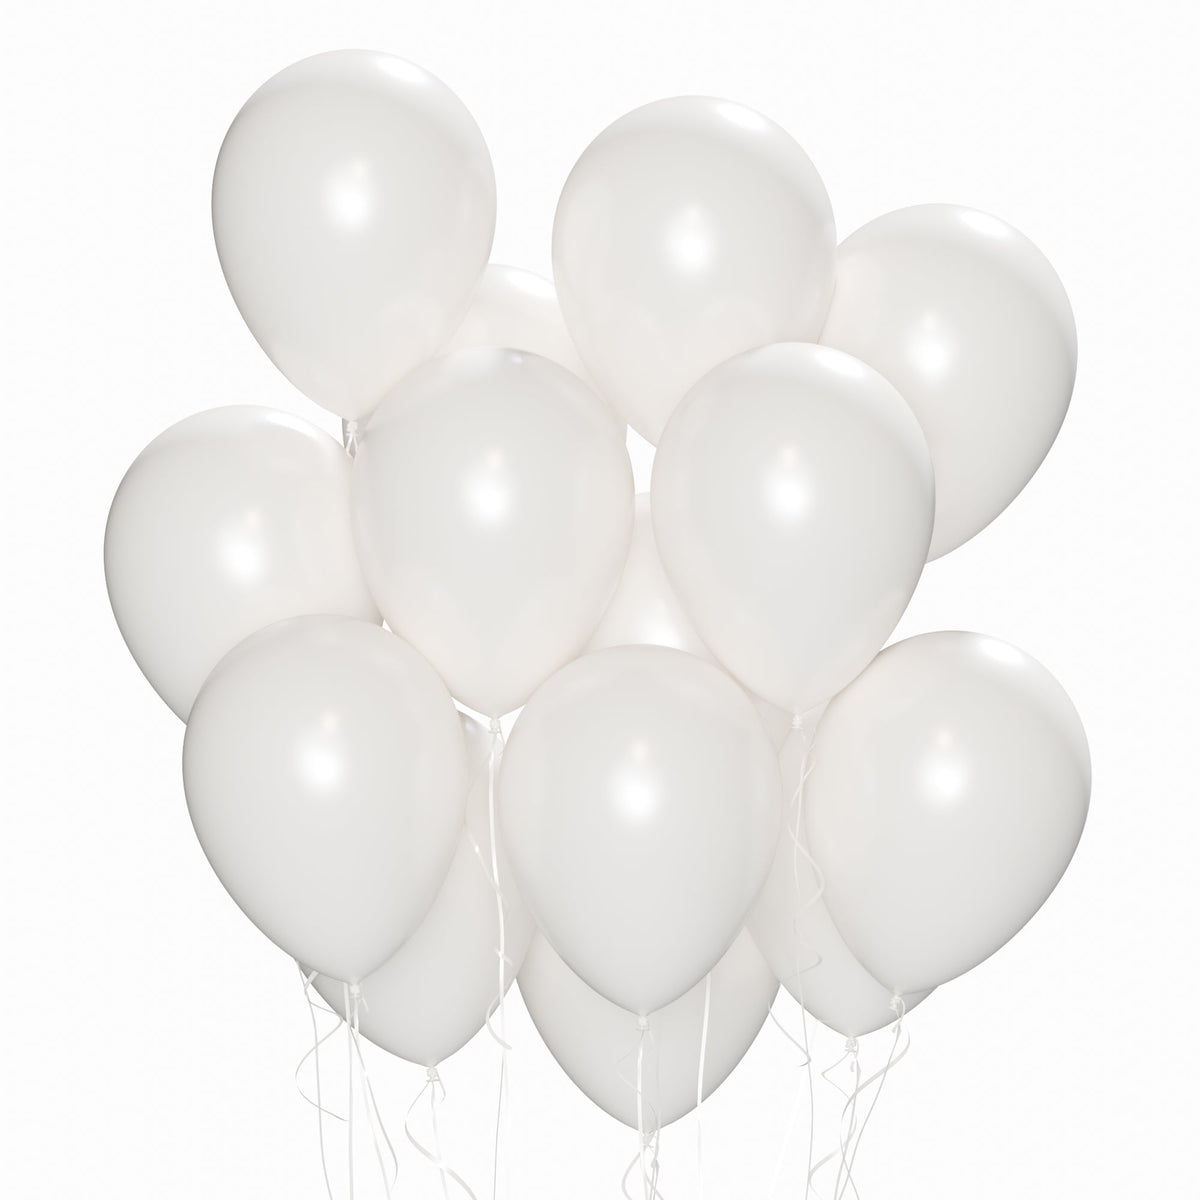 WIDE OCEAN INTERNATIONAL TRADE BEIJING CO., LTD Balloons White Latex Balloon 12 Inches, Pearl Collection, 72 Count 810064197499